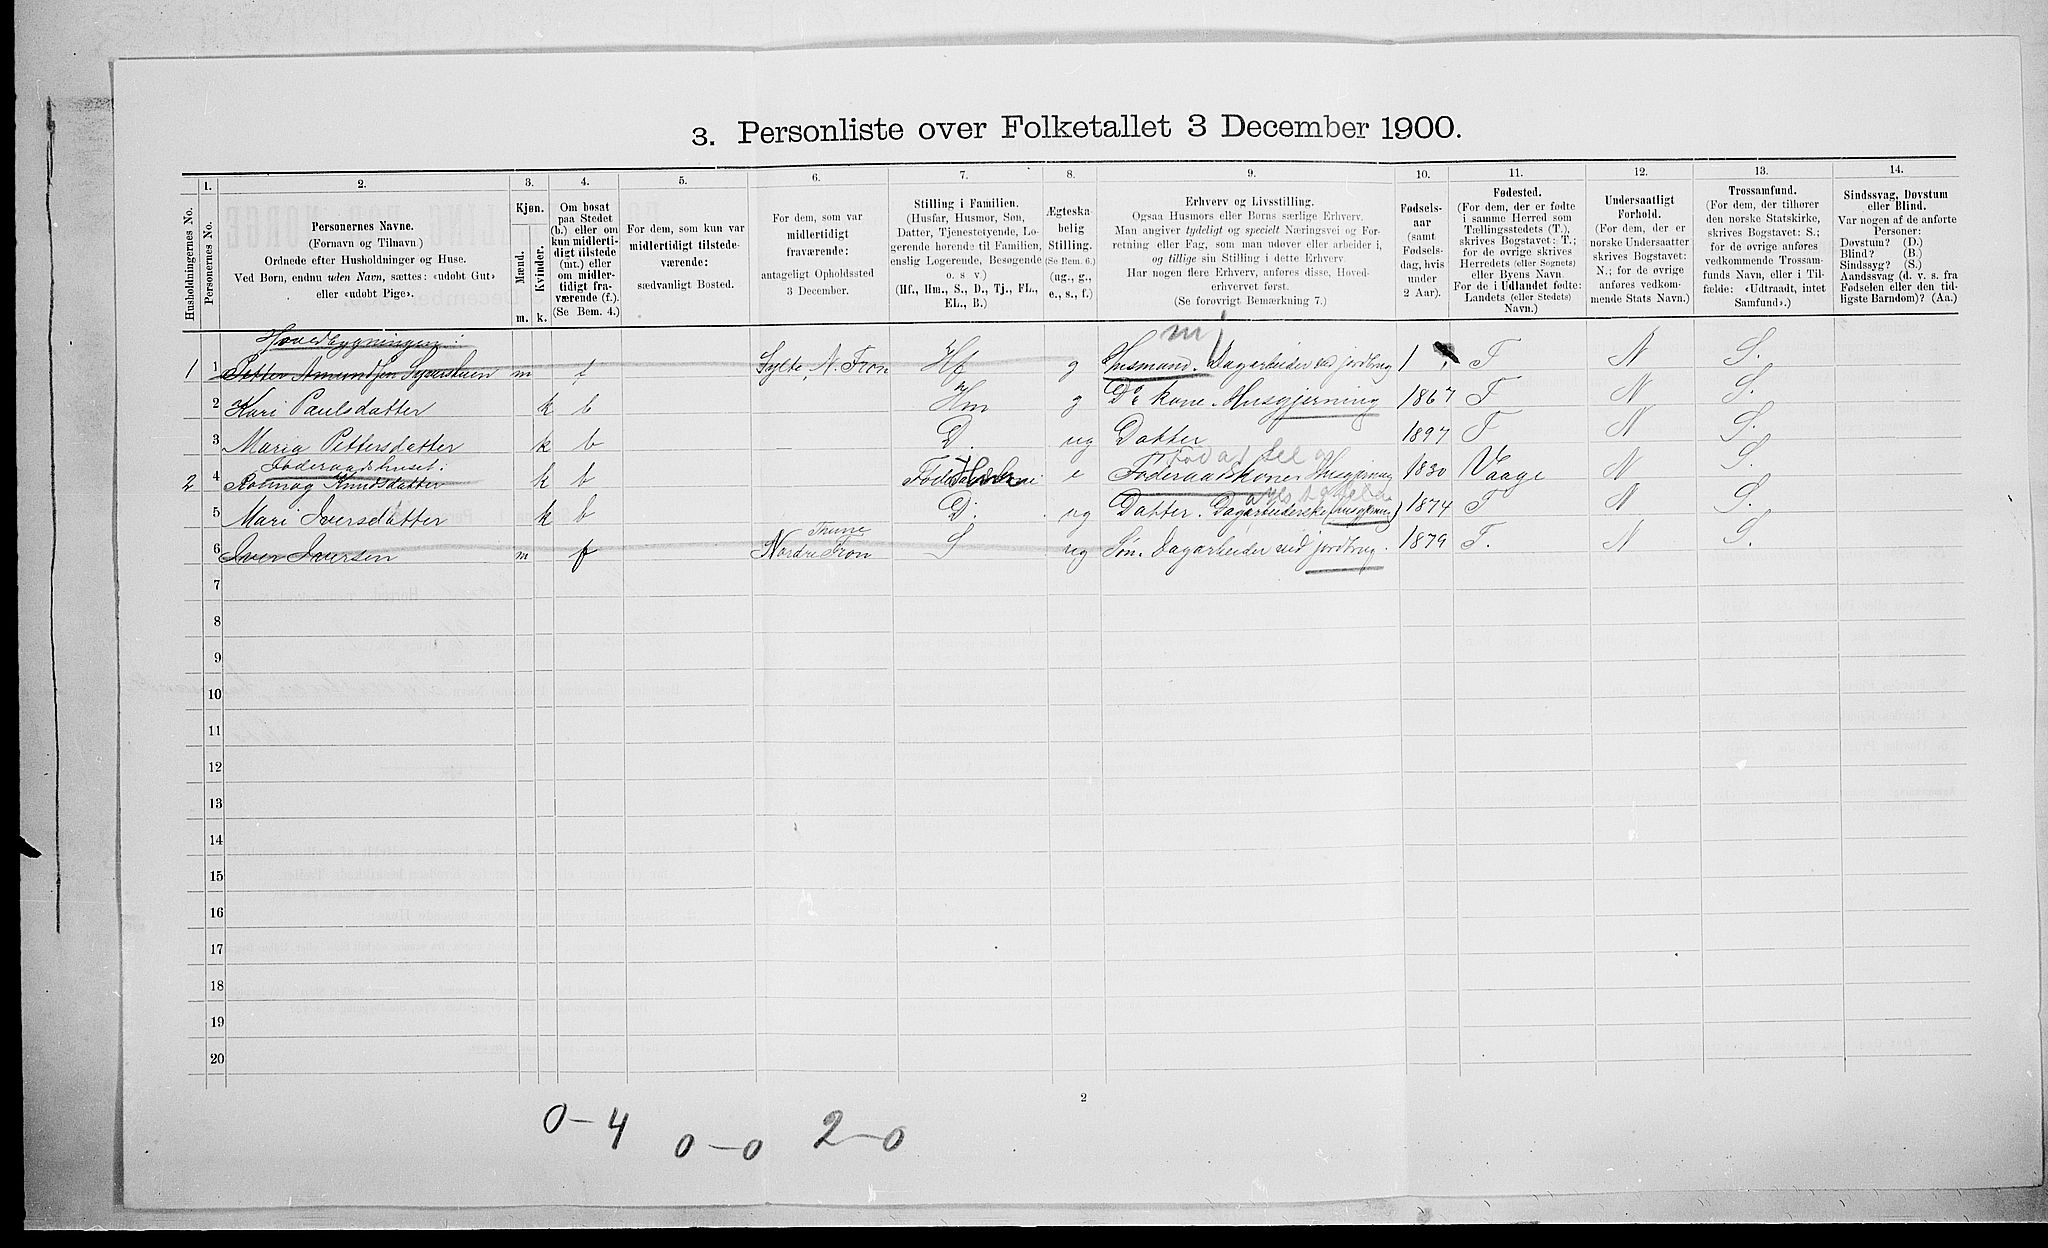 SAH, 1900 census for Nord-Fron, 1900, p. 443